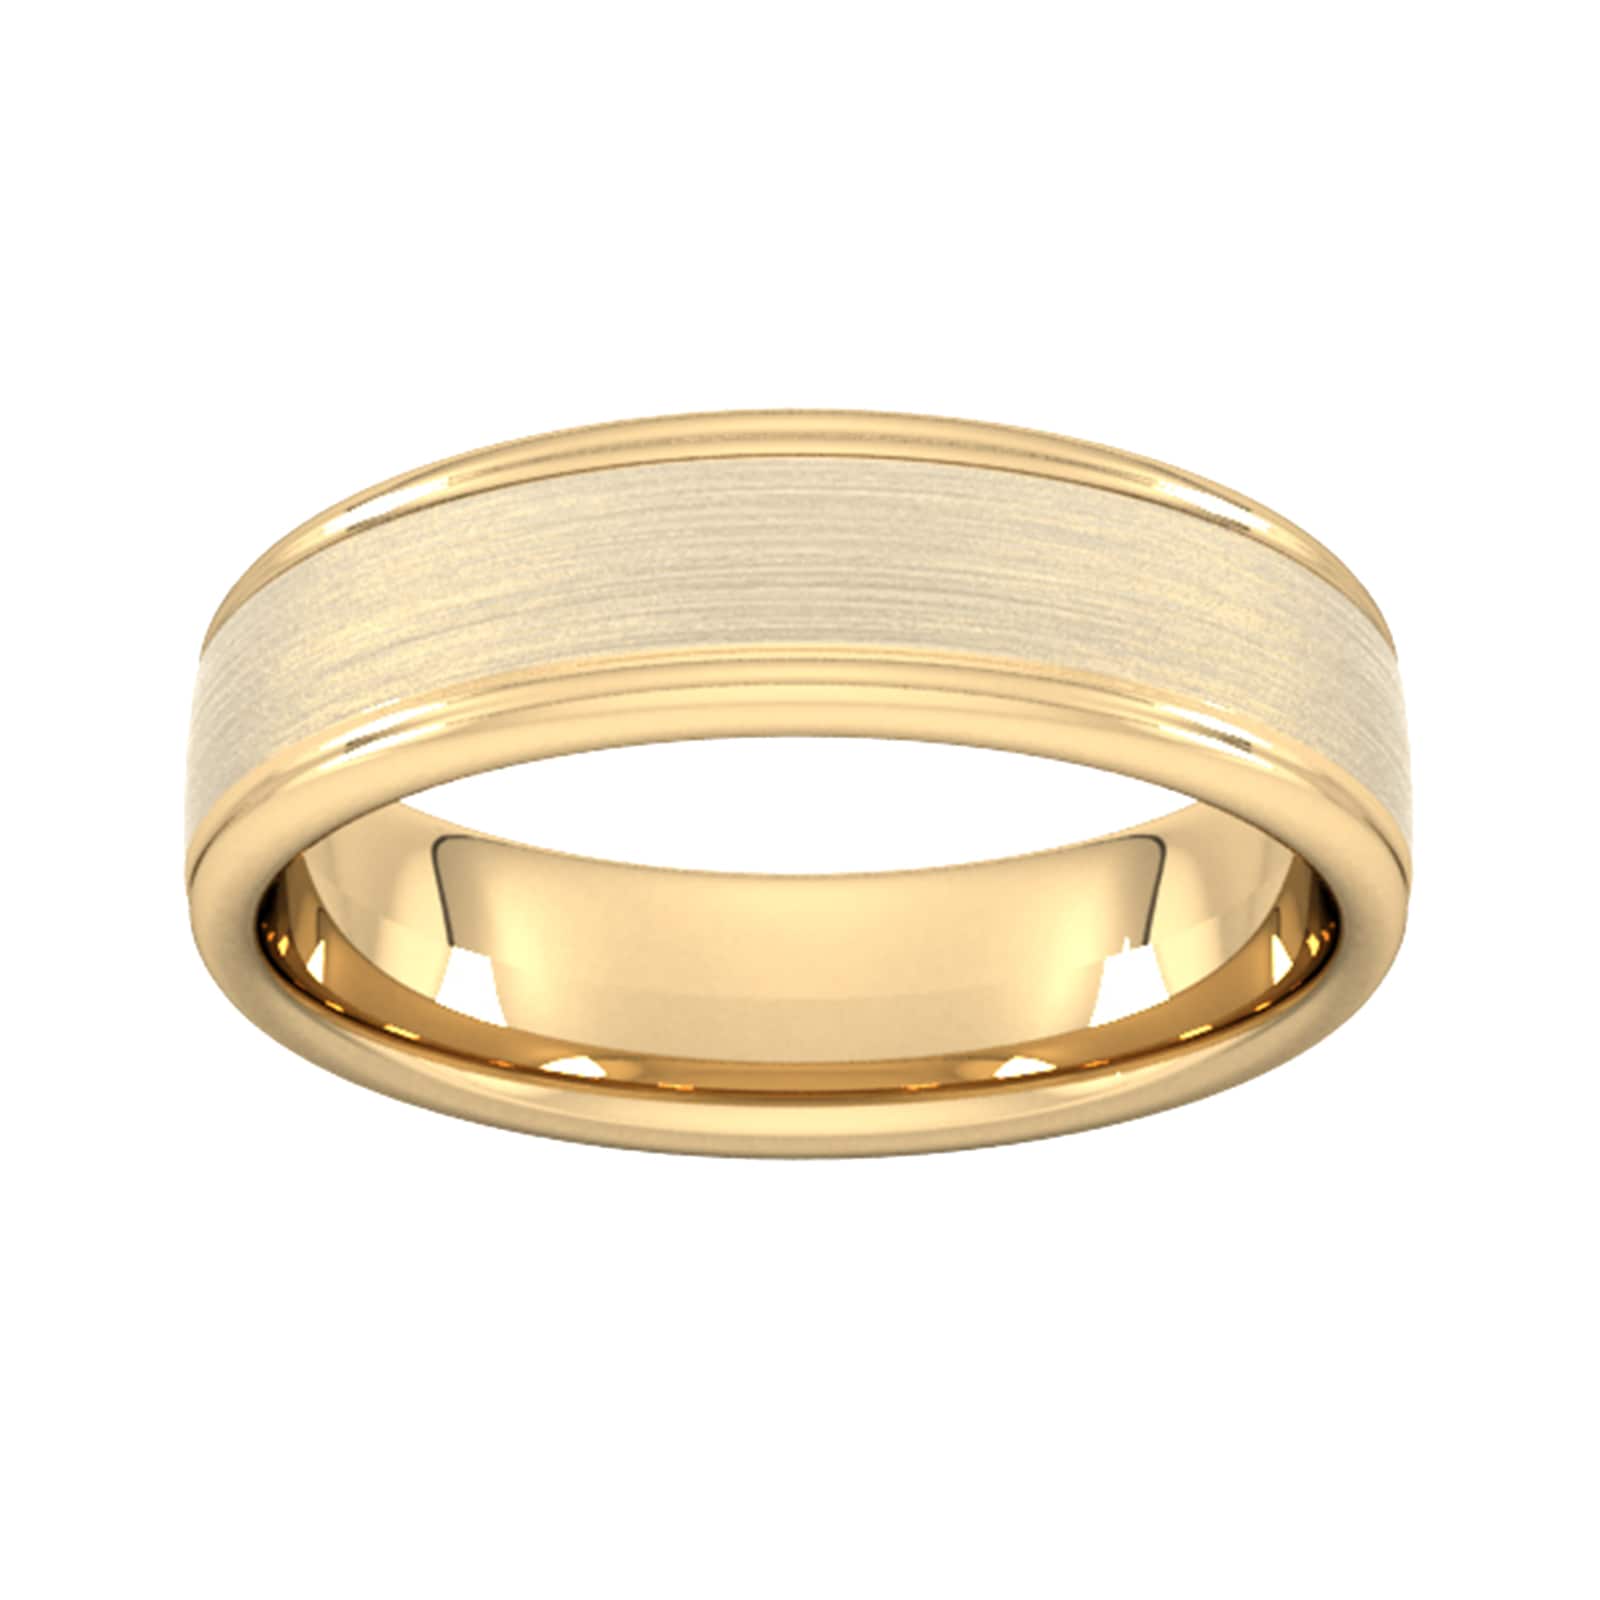 6mm D Shape Standard Matt Centre With Grooves Wedding Ring In 18 Carat Yellow Gold - Ring Size Q